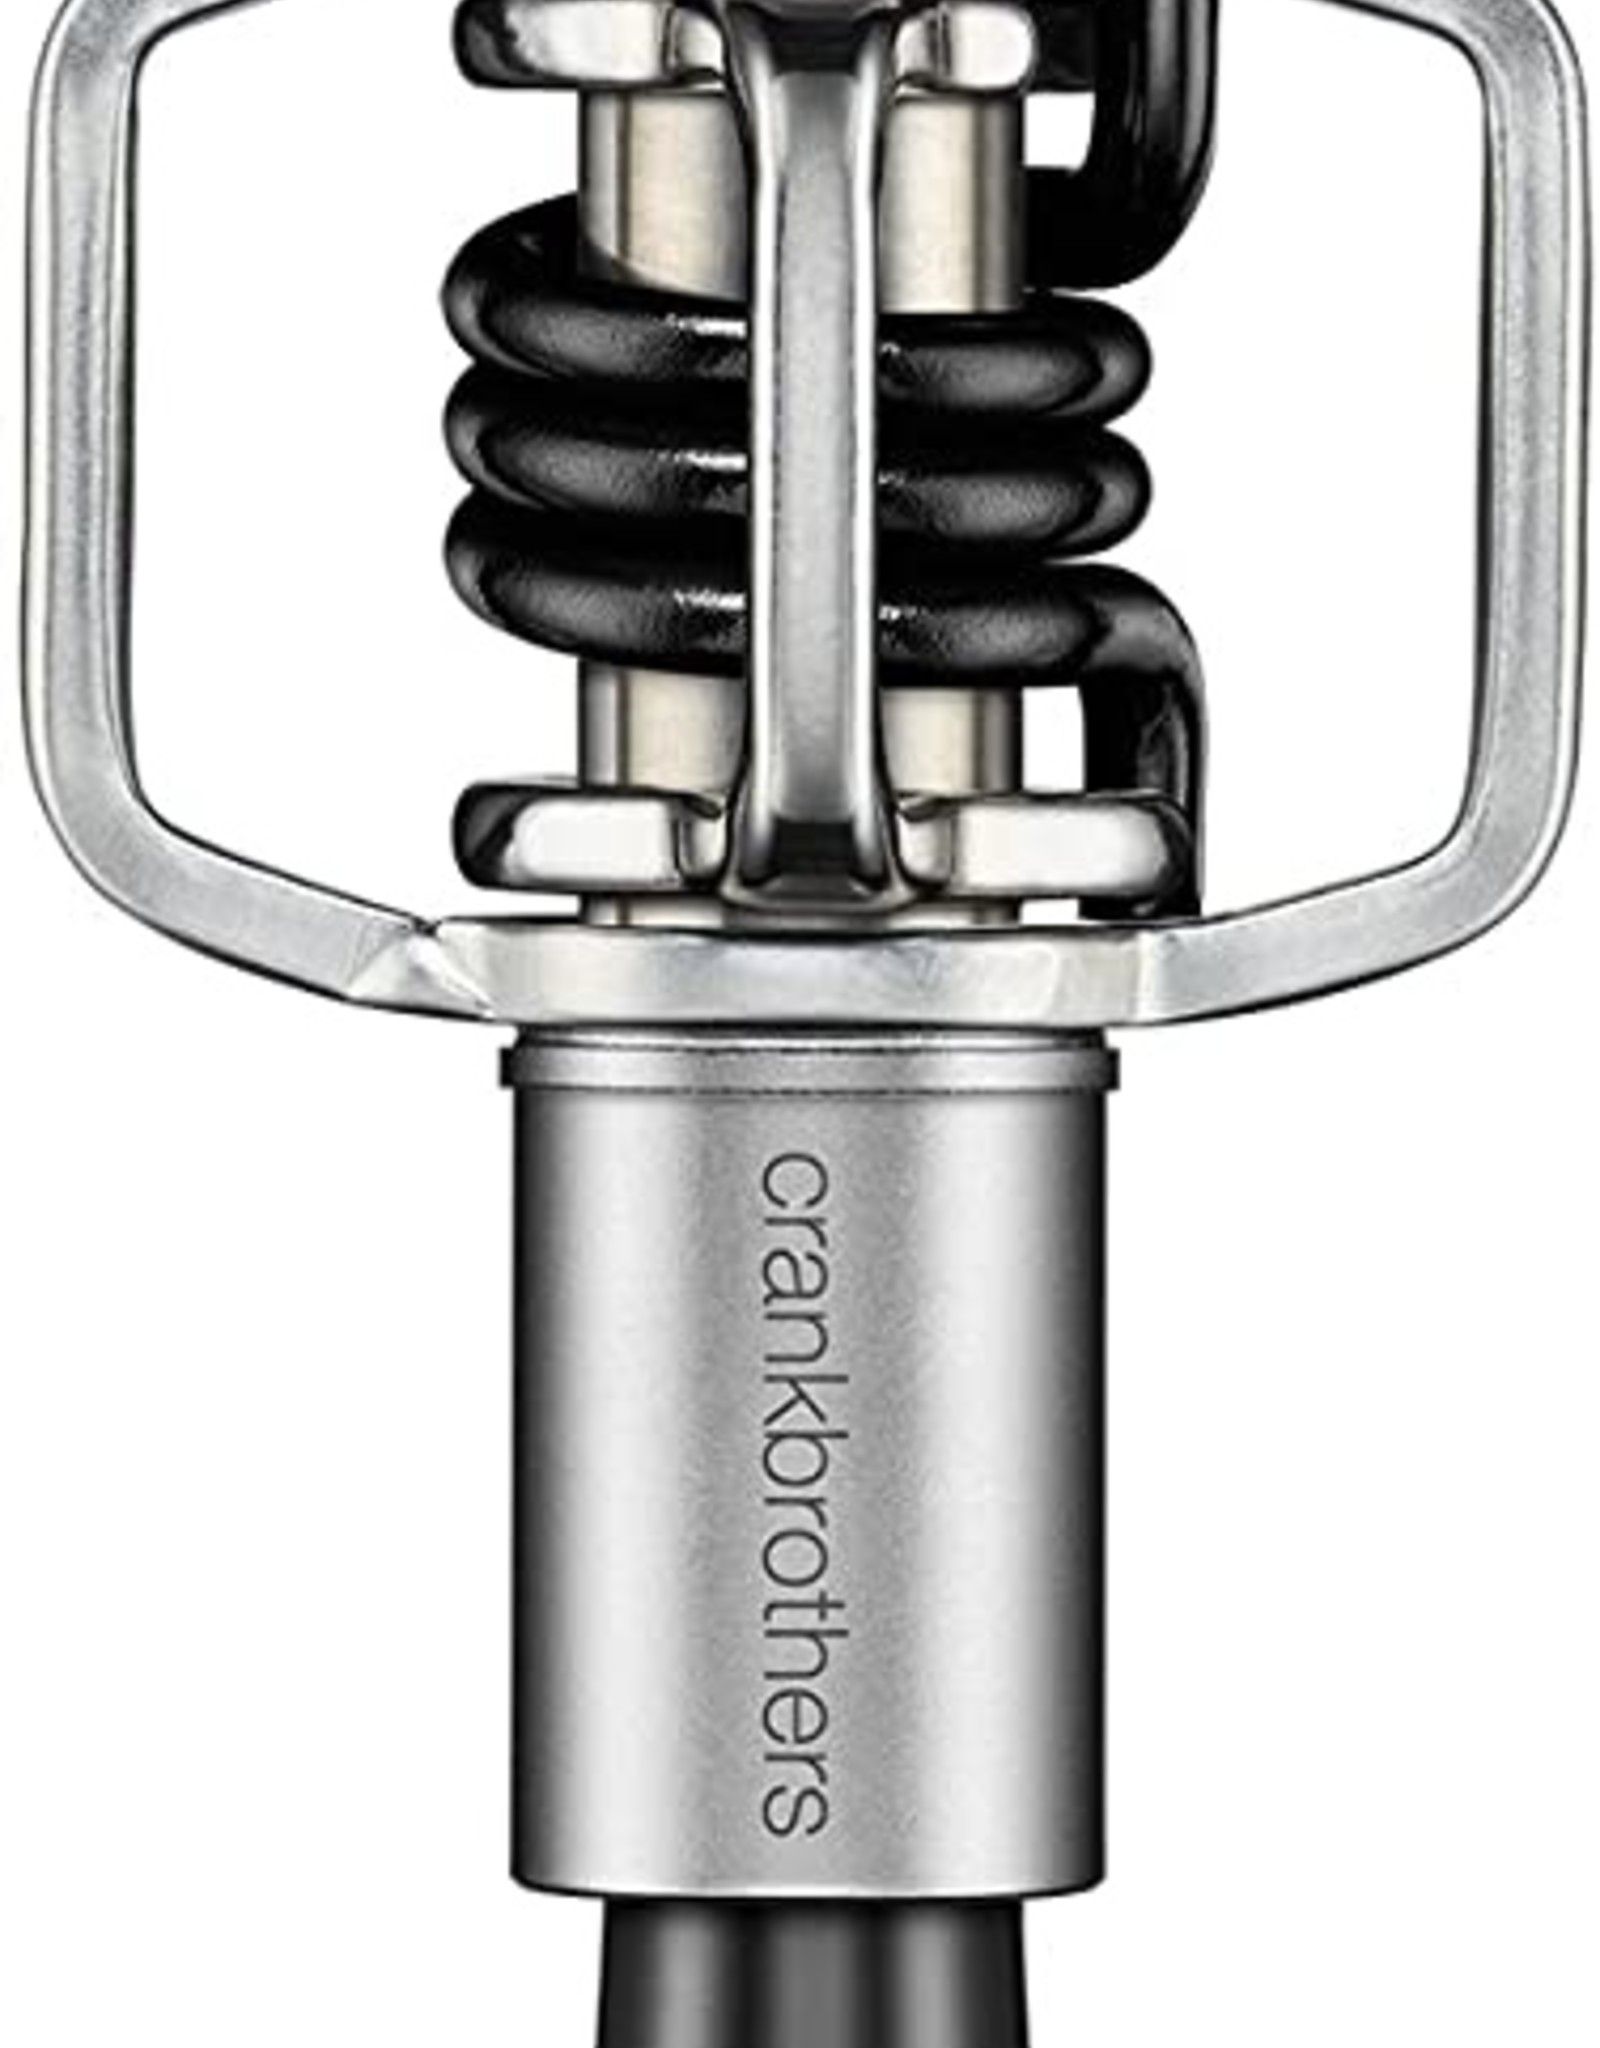 CRANK BROTHERS EGGBEATER 1 PEDAL